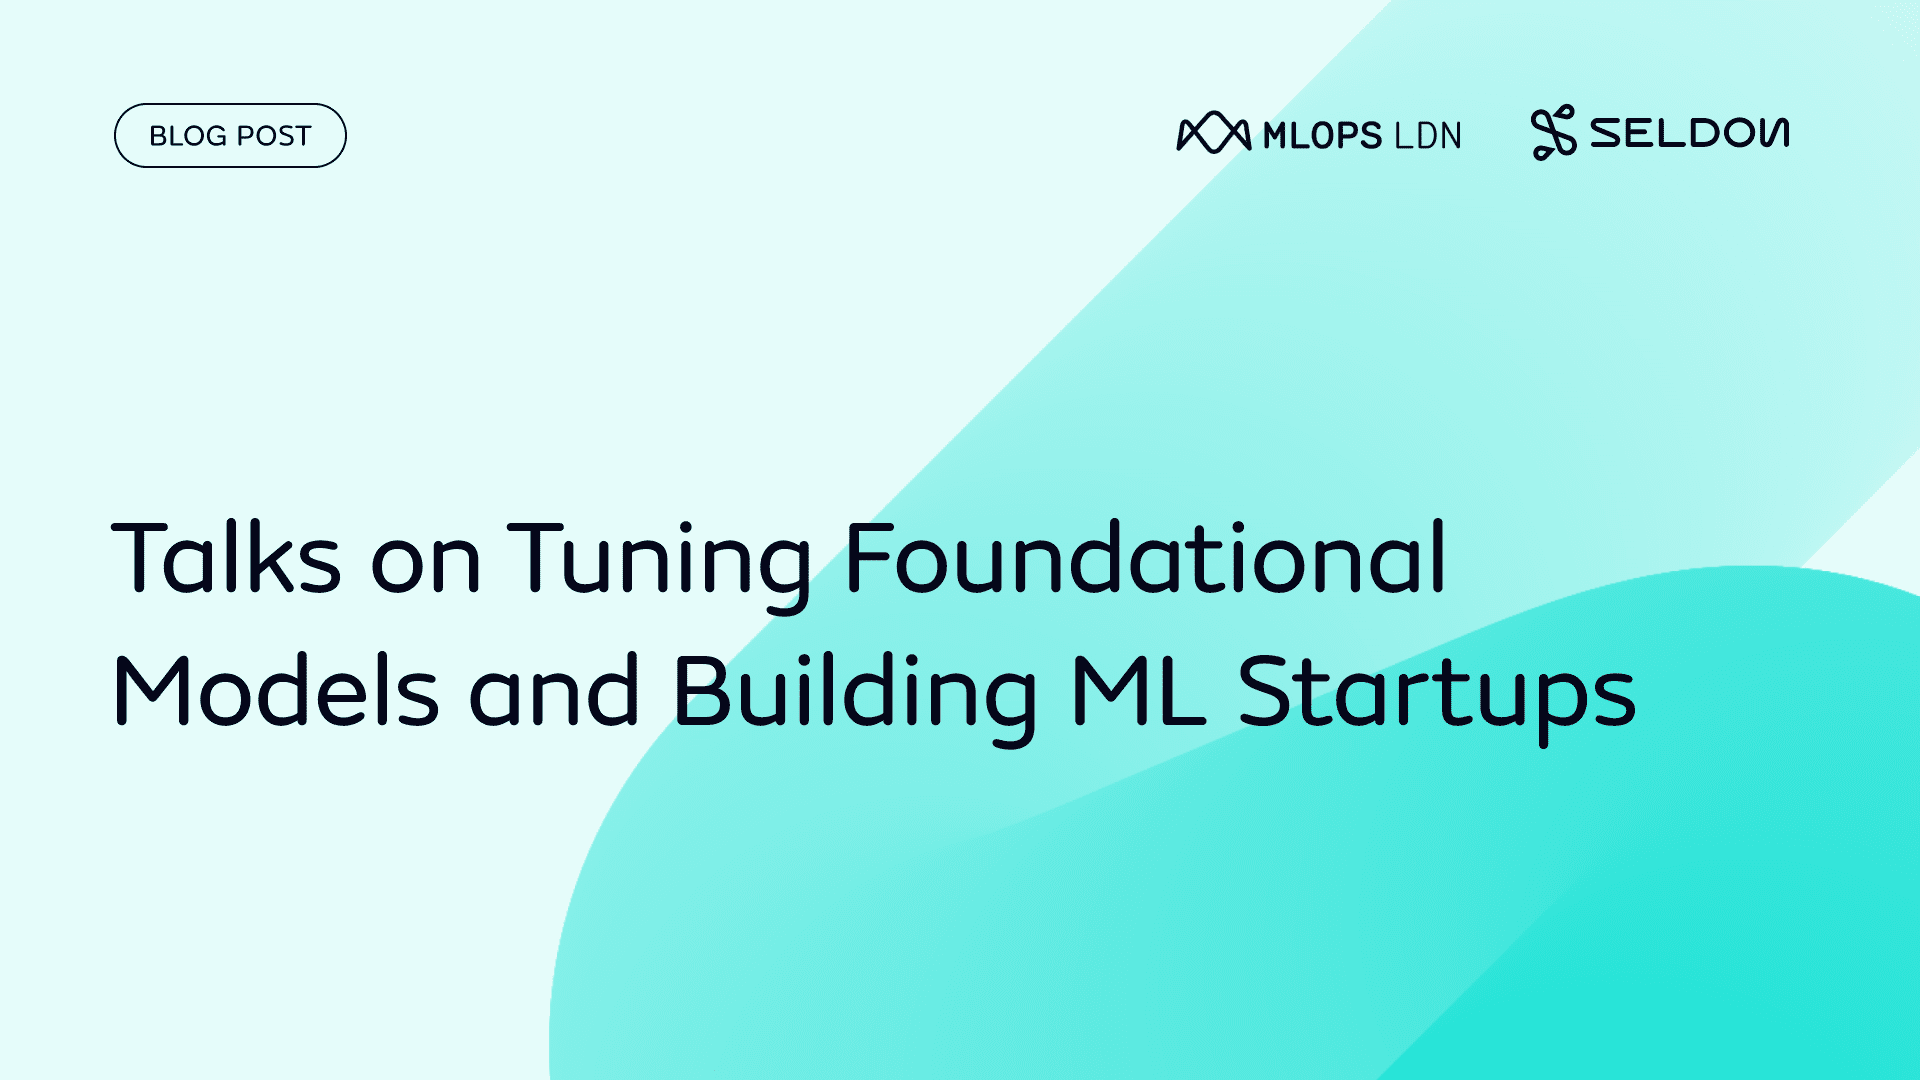 MLOps London March: Talks on Tuning Foundational Models and Building ML Startups